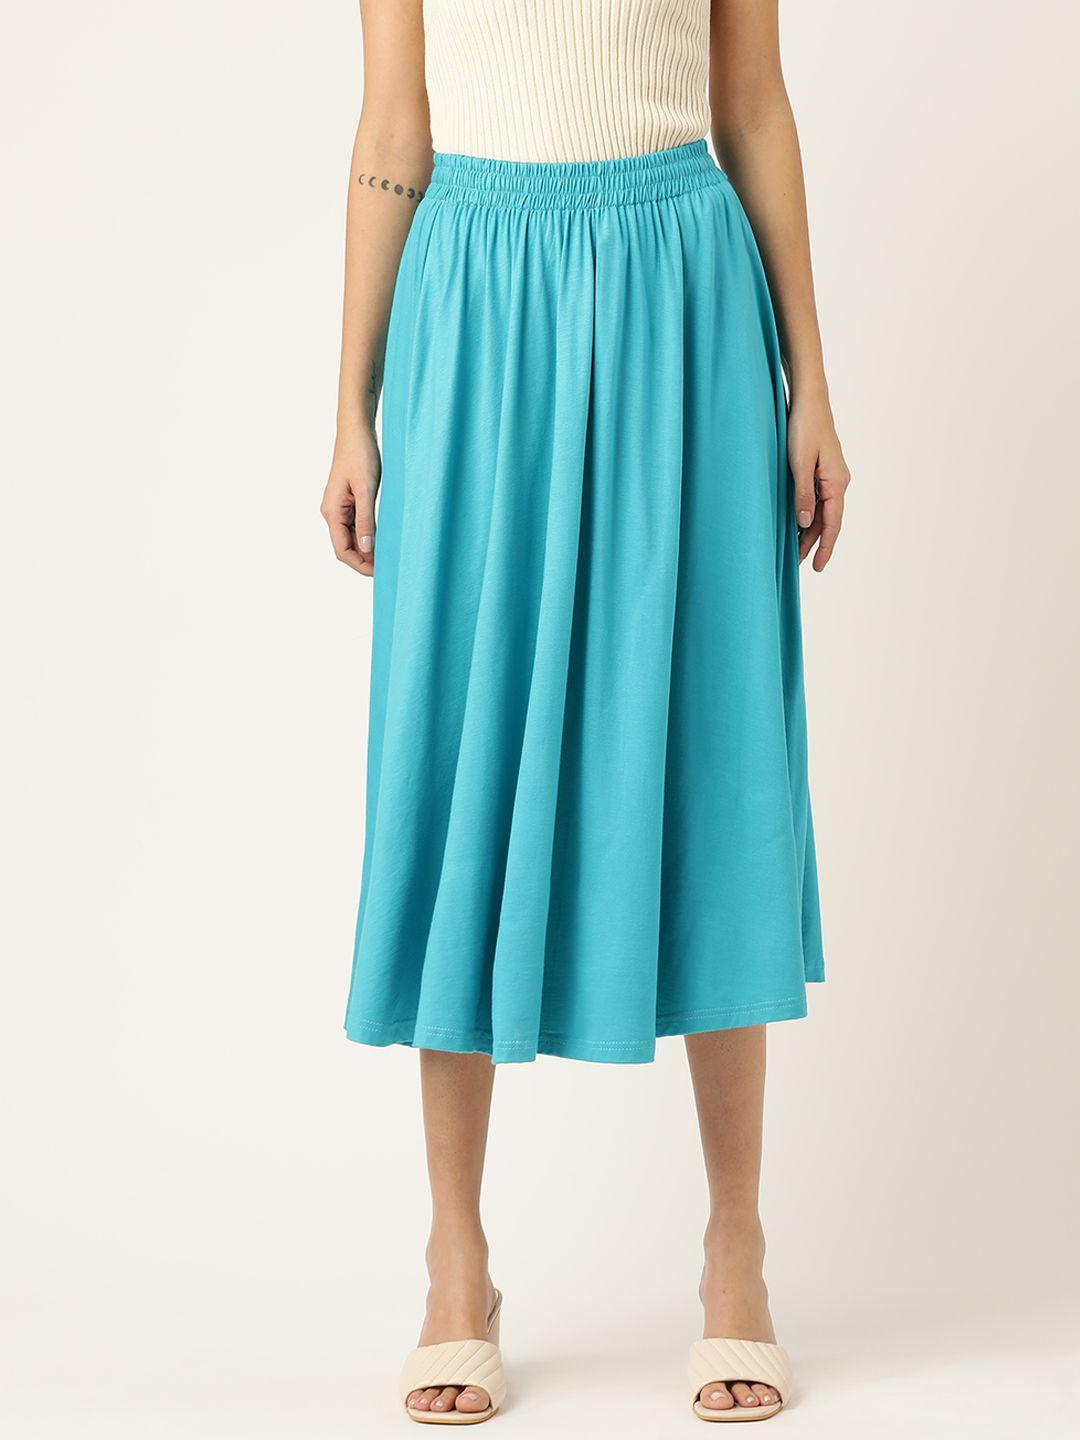 brinns-women-turquoise-blue-solid-a-line-skirt